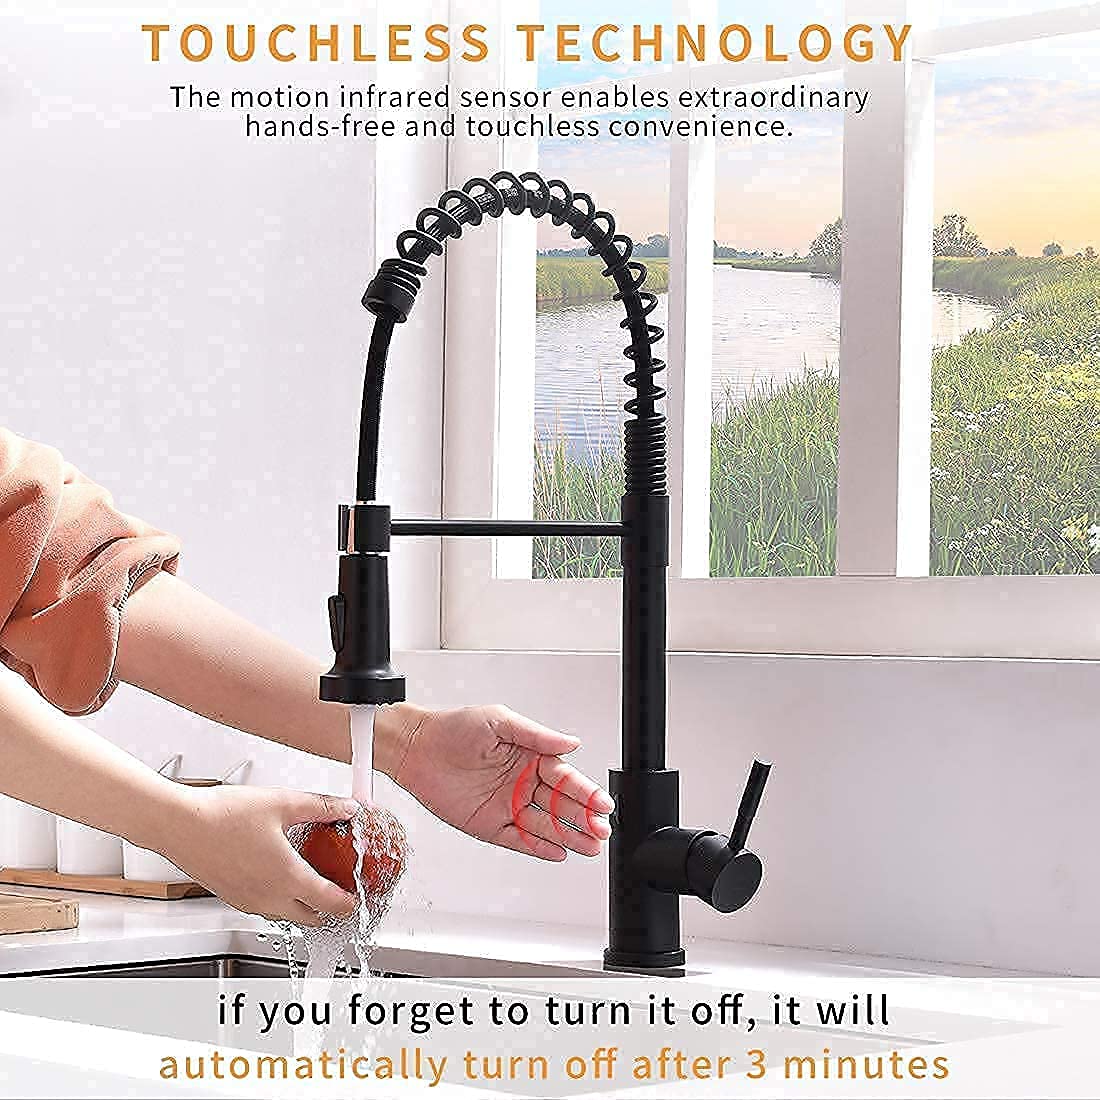 GIMILI Touchless Spring Kitchen Faucet with Deck Plate,Matte Black